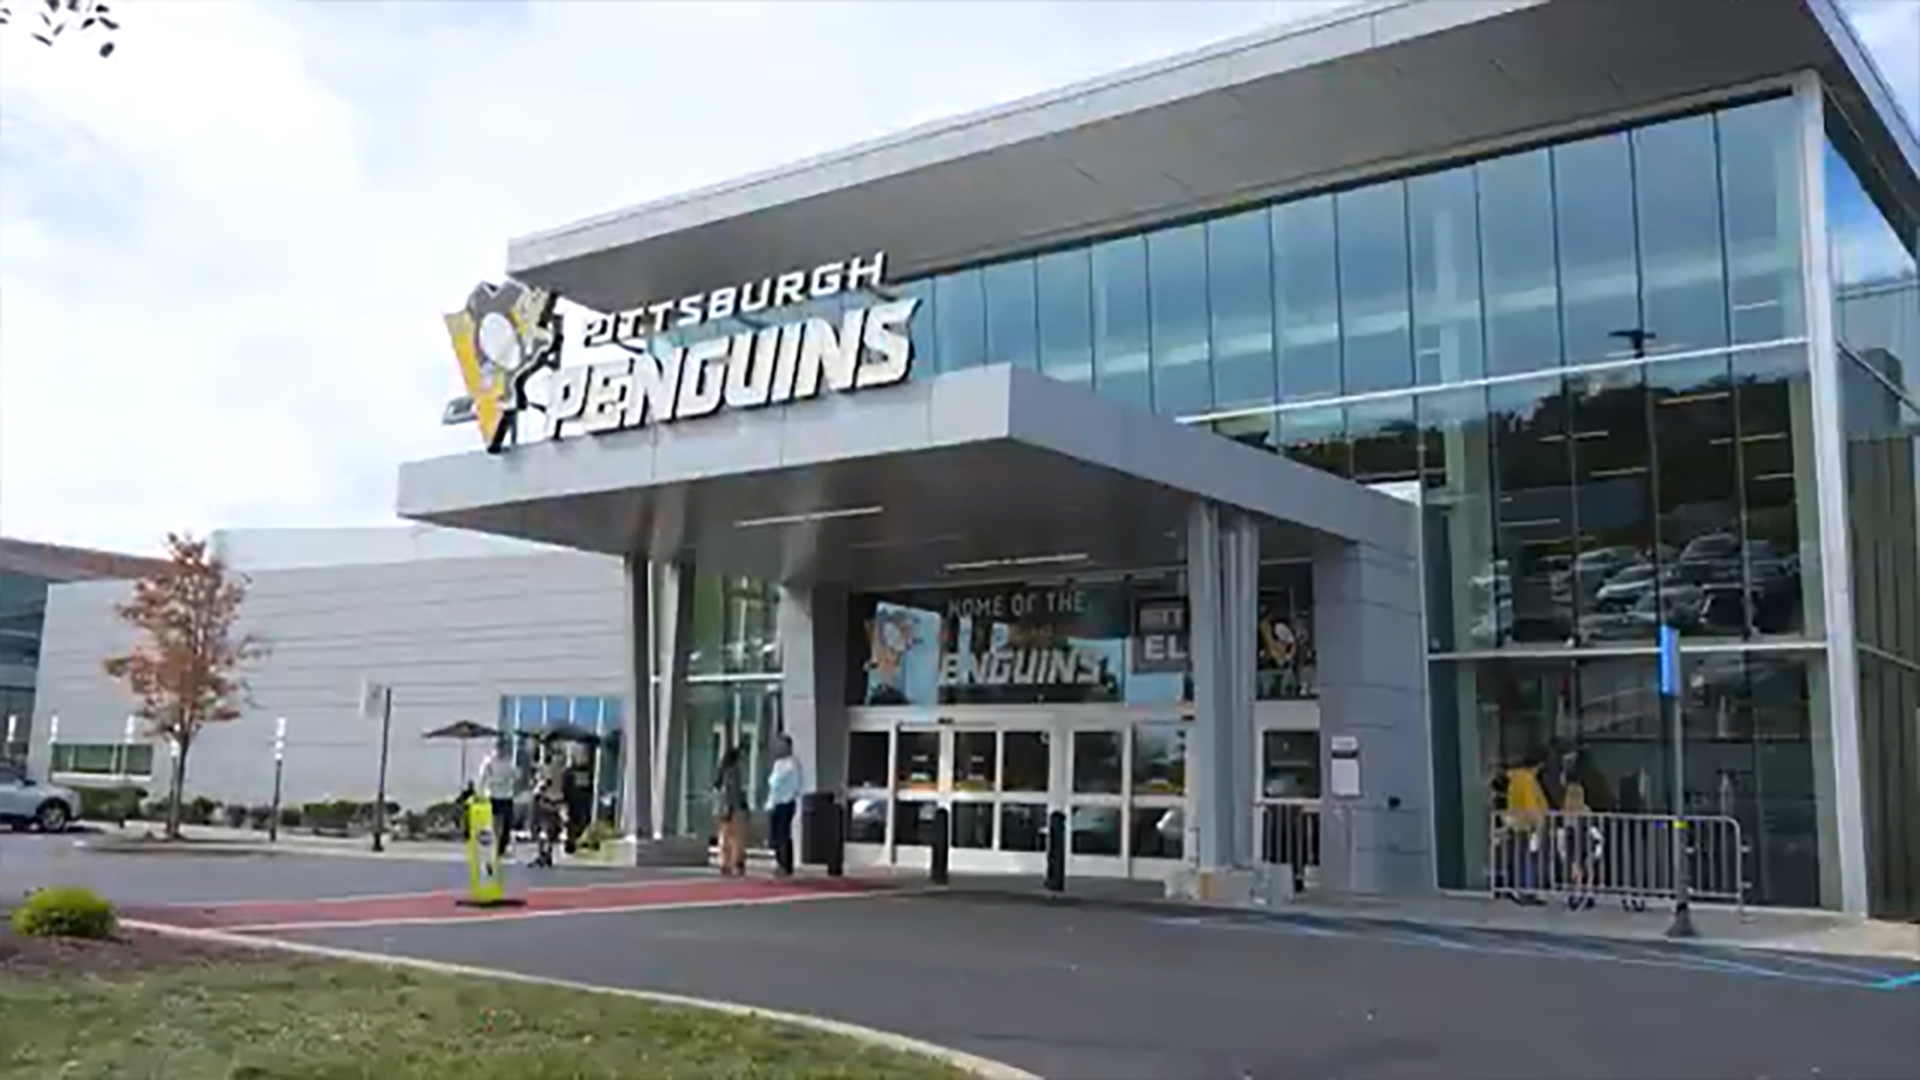 Play Video: MSA Safety Expands Partnership With Pittsburgh Penguins, Helmet Unveiling